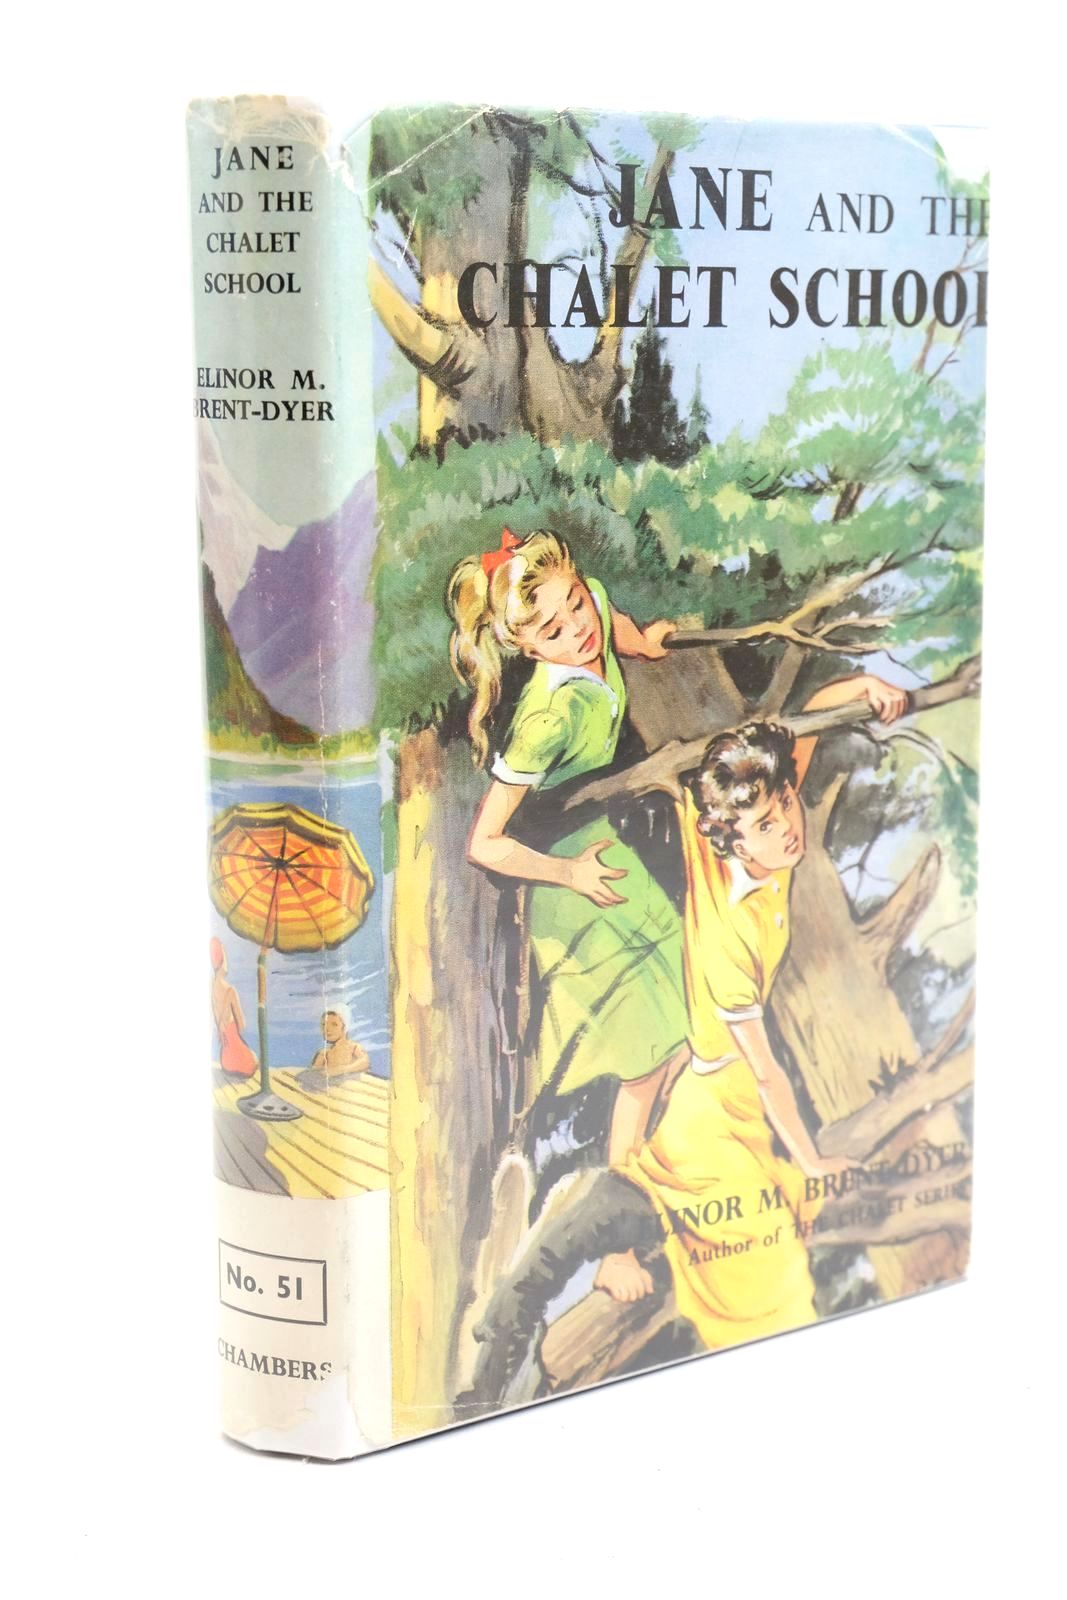 Photo of JANE AND THE CHALET SCHOOL written by Brent-Dyer, Elinor M. published by W. &amp; R. Chambers Limited (STOCK CODE: 1320968)  for sale by Stella & Rose's Books